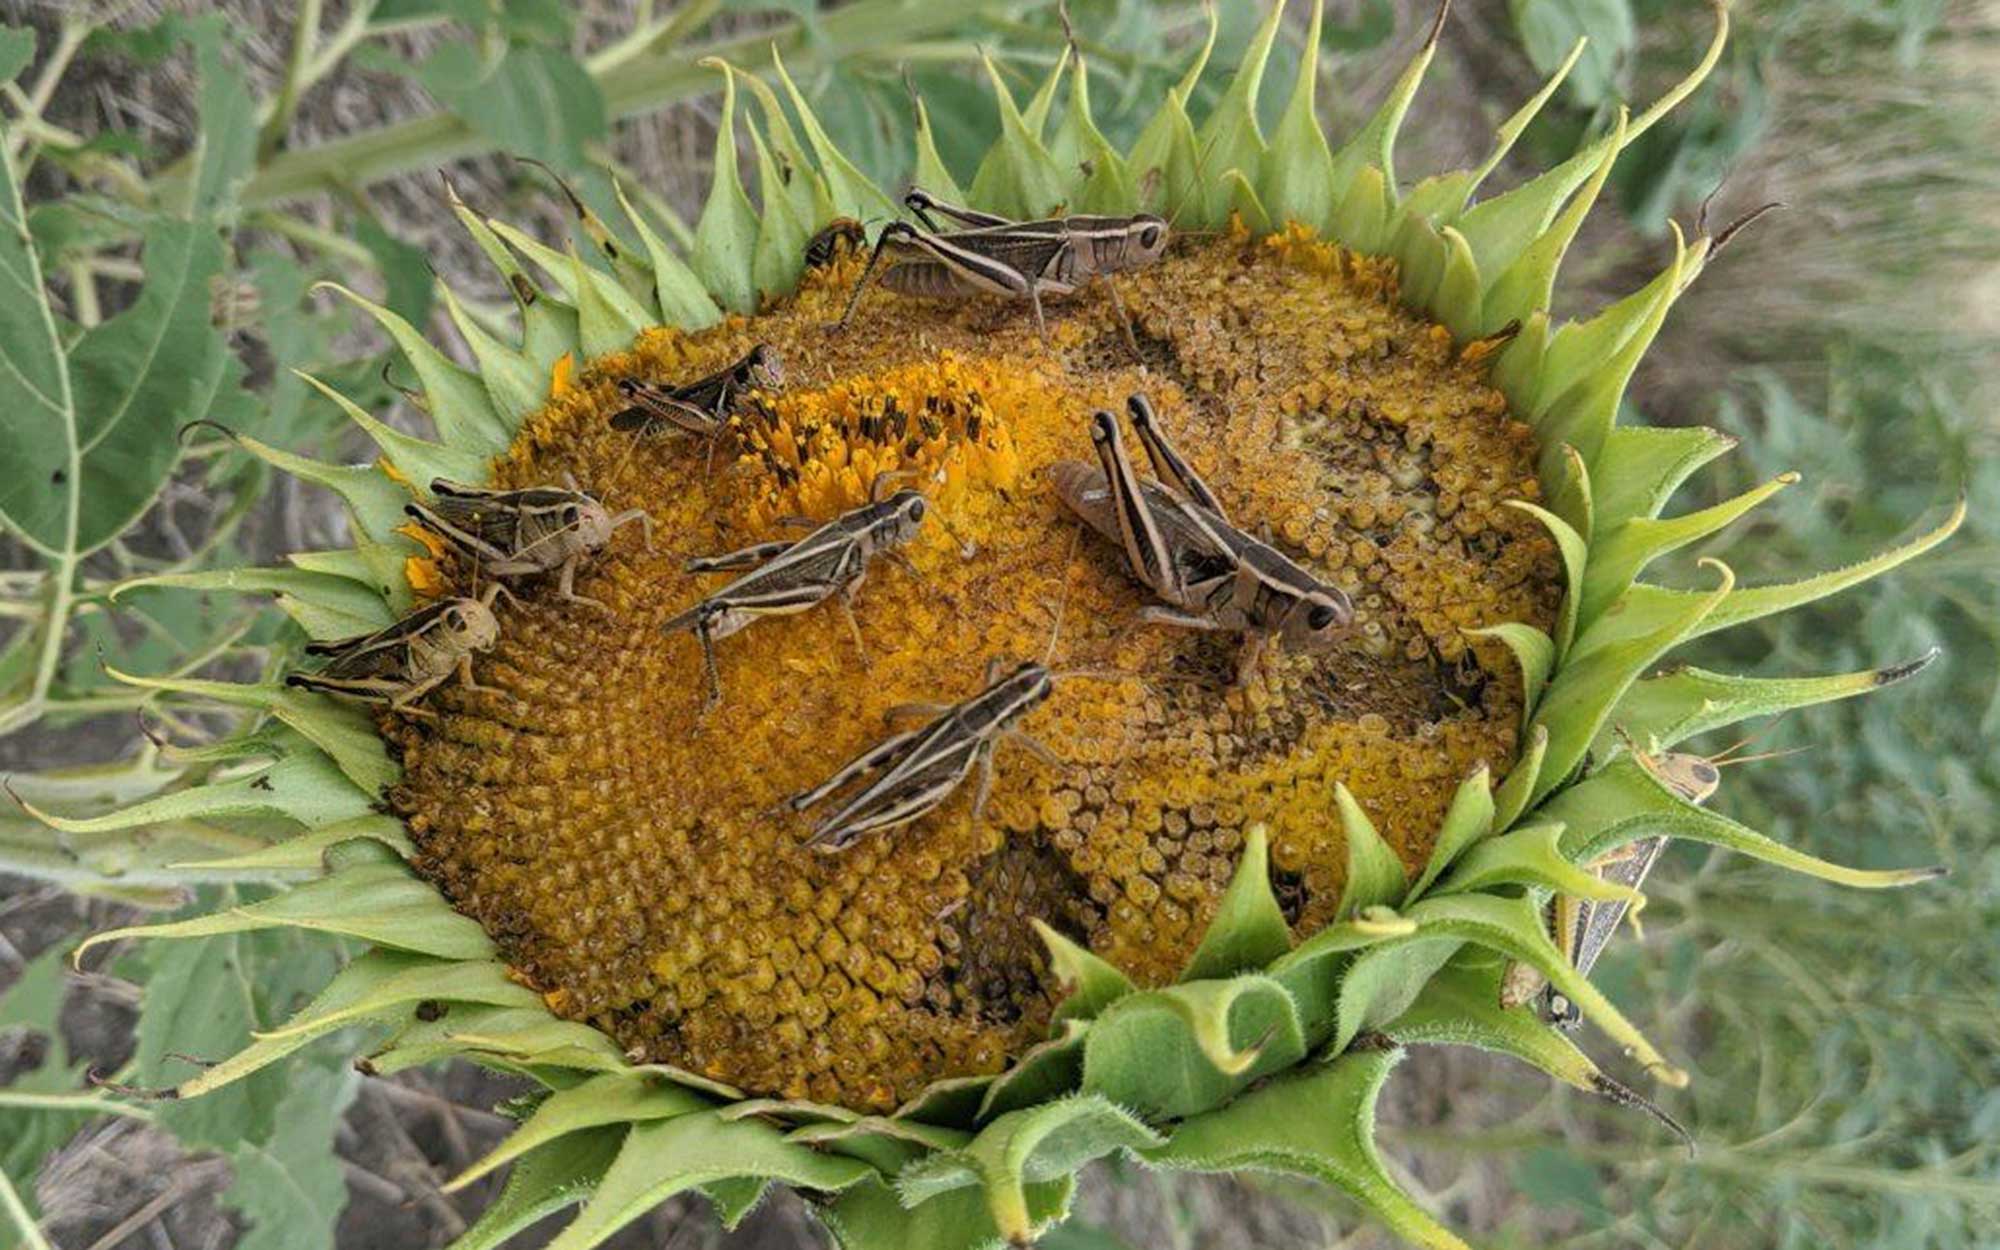 Numerous grasshoppers feeding on a yellow sunflower head.